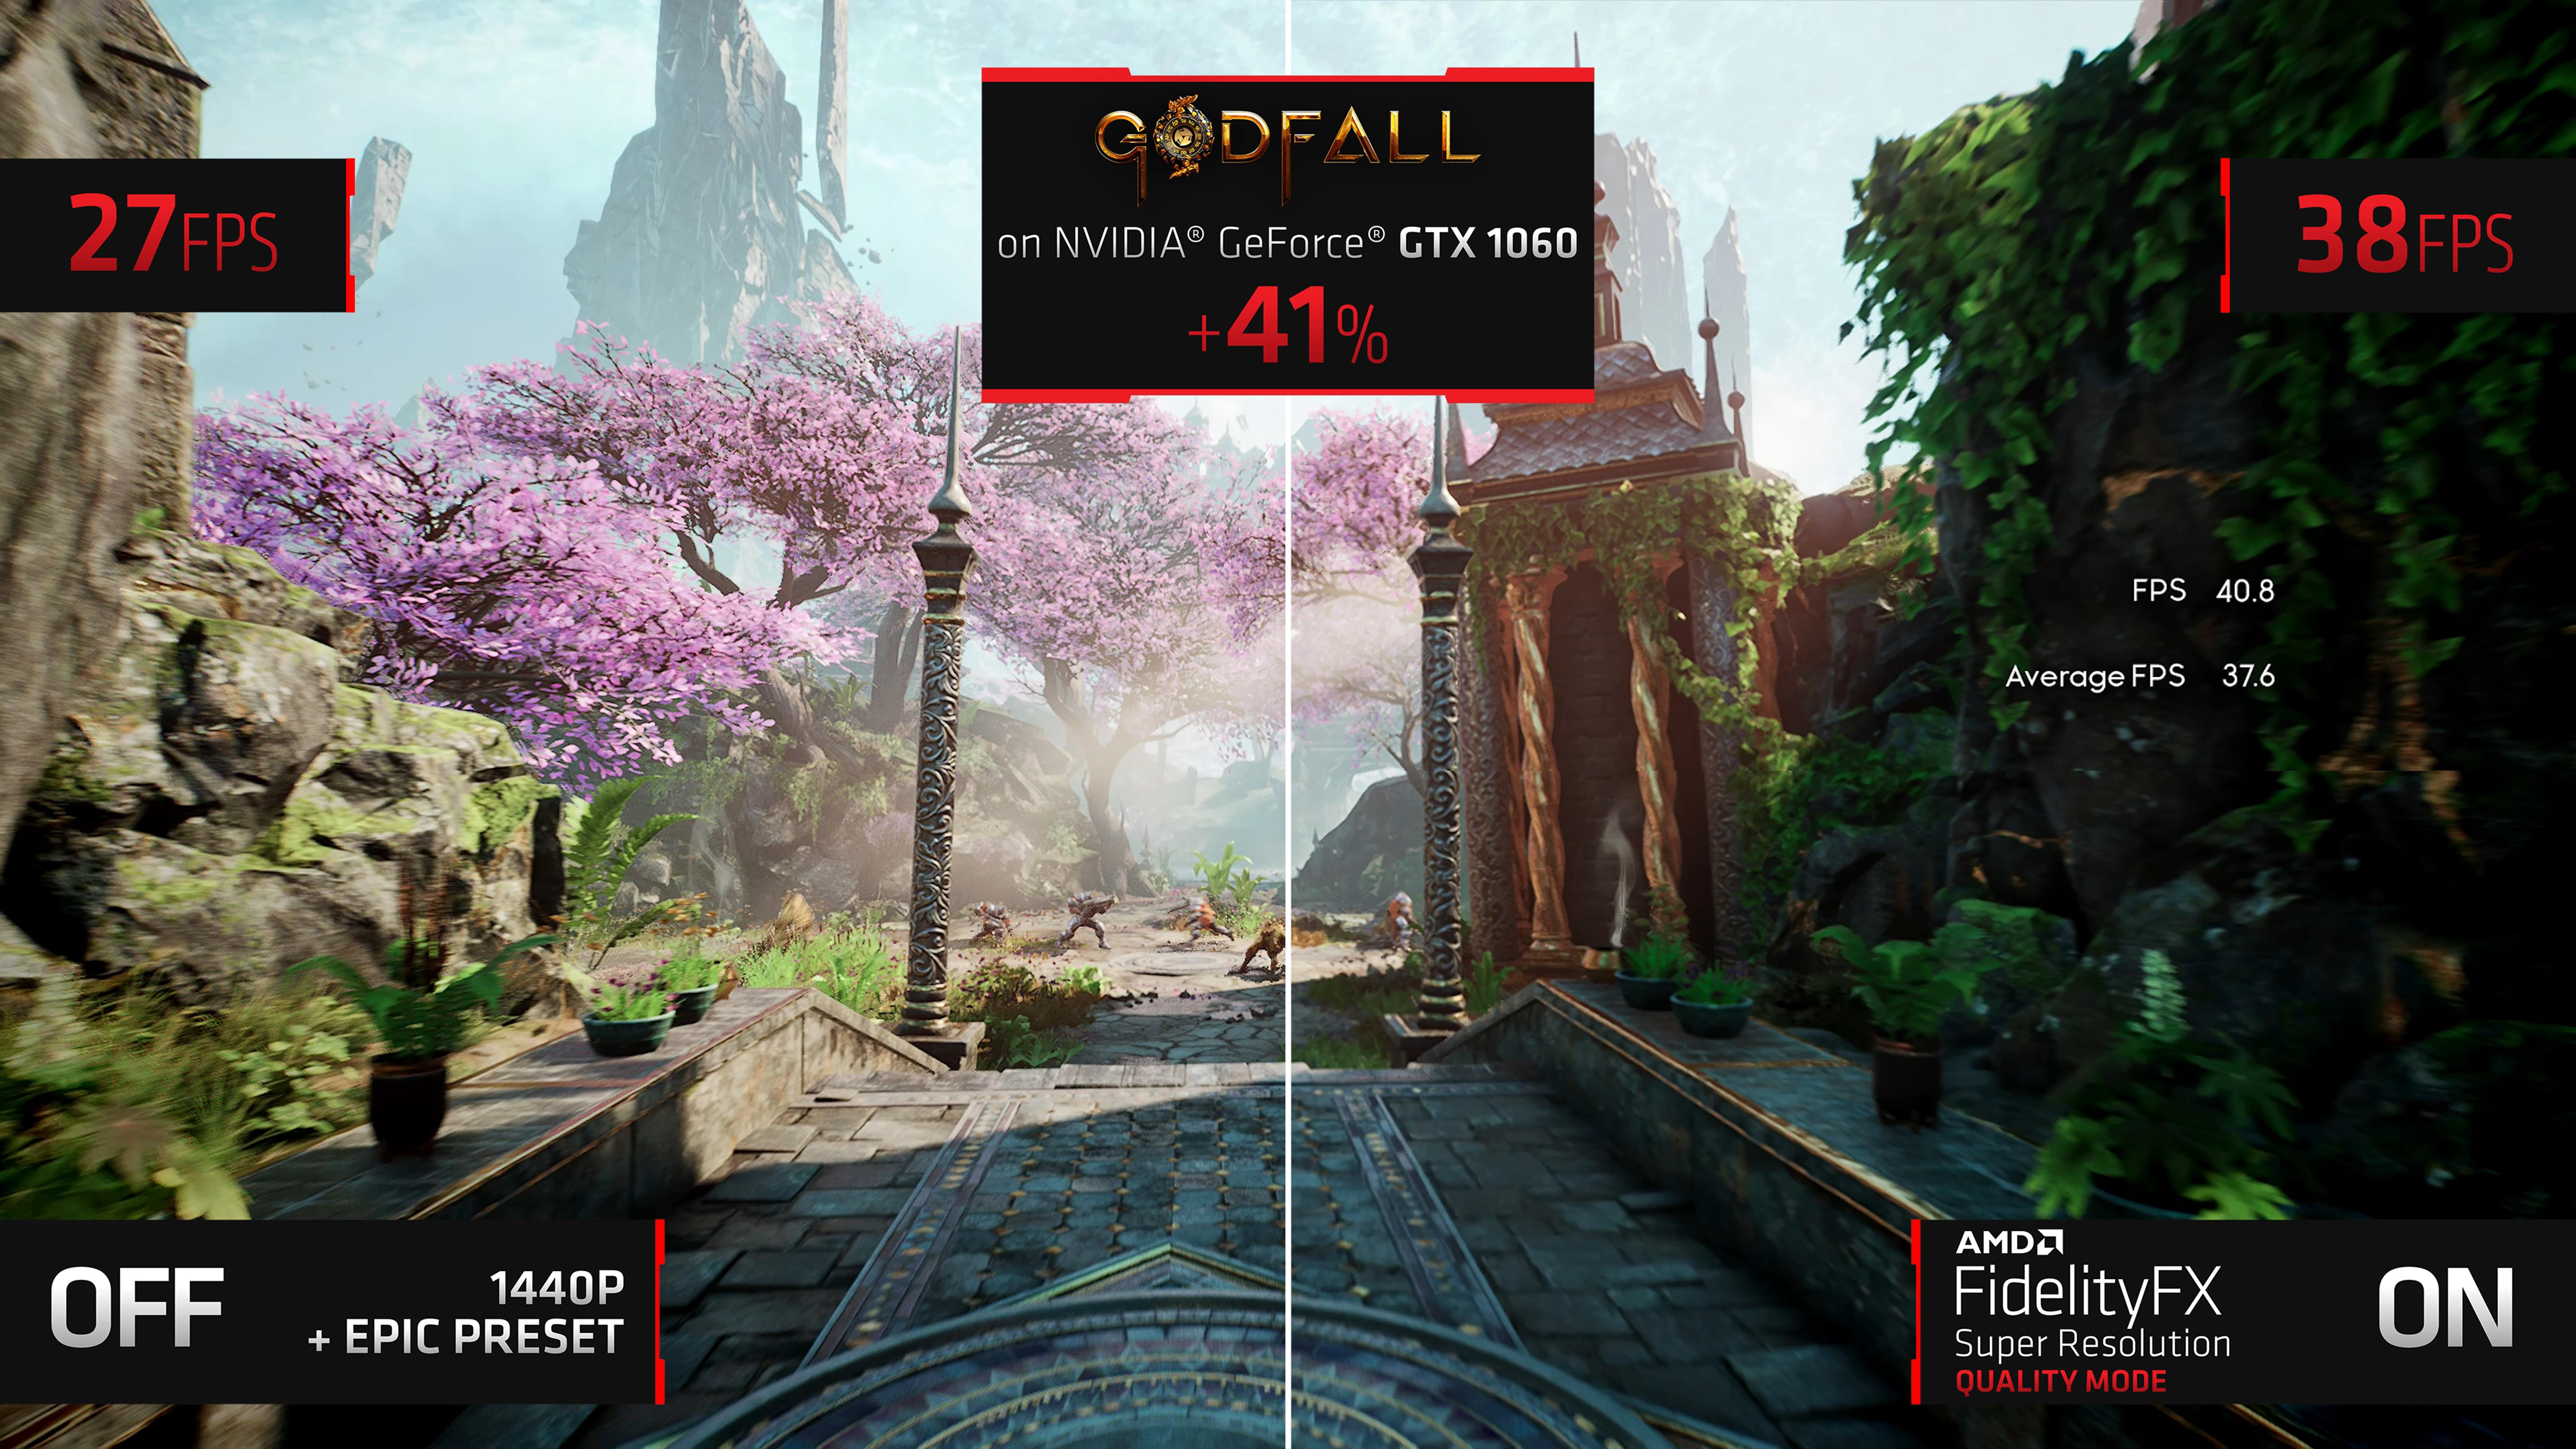 Amd Formally Unveils Fidelityfx Super Resolution Open Source Game Upscaling